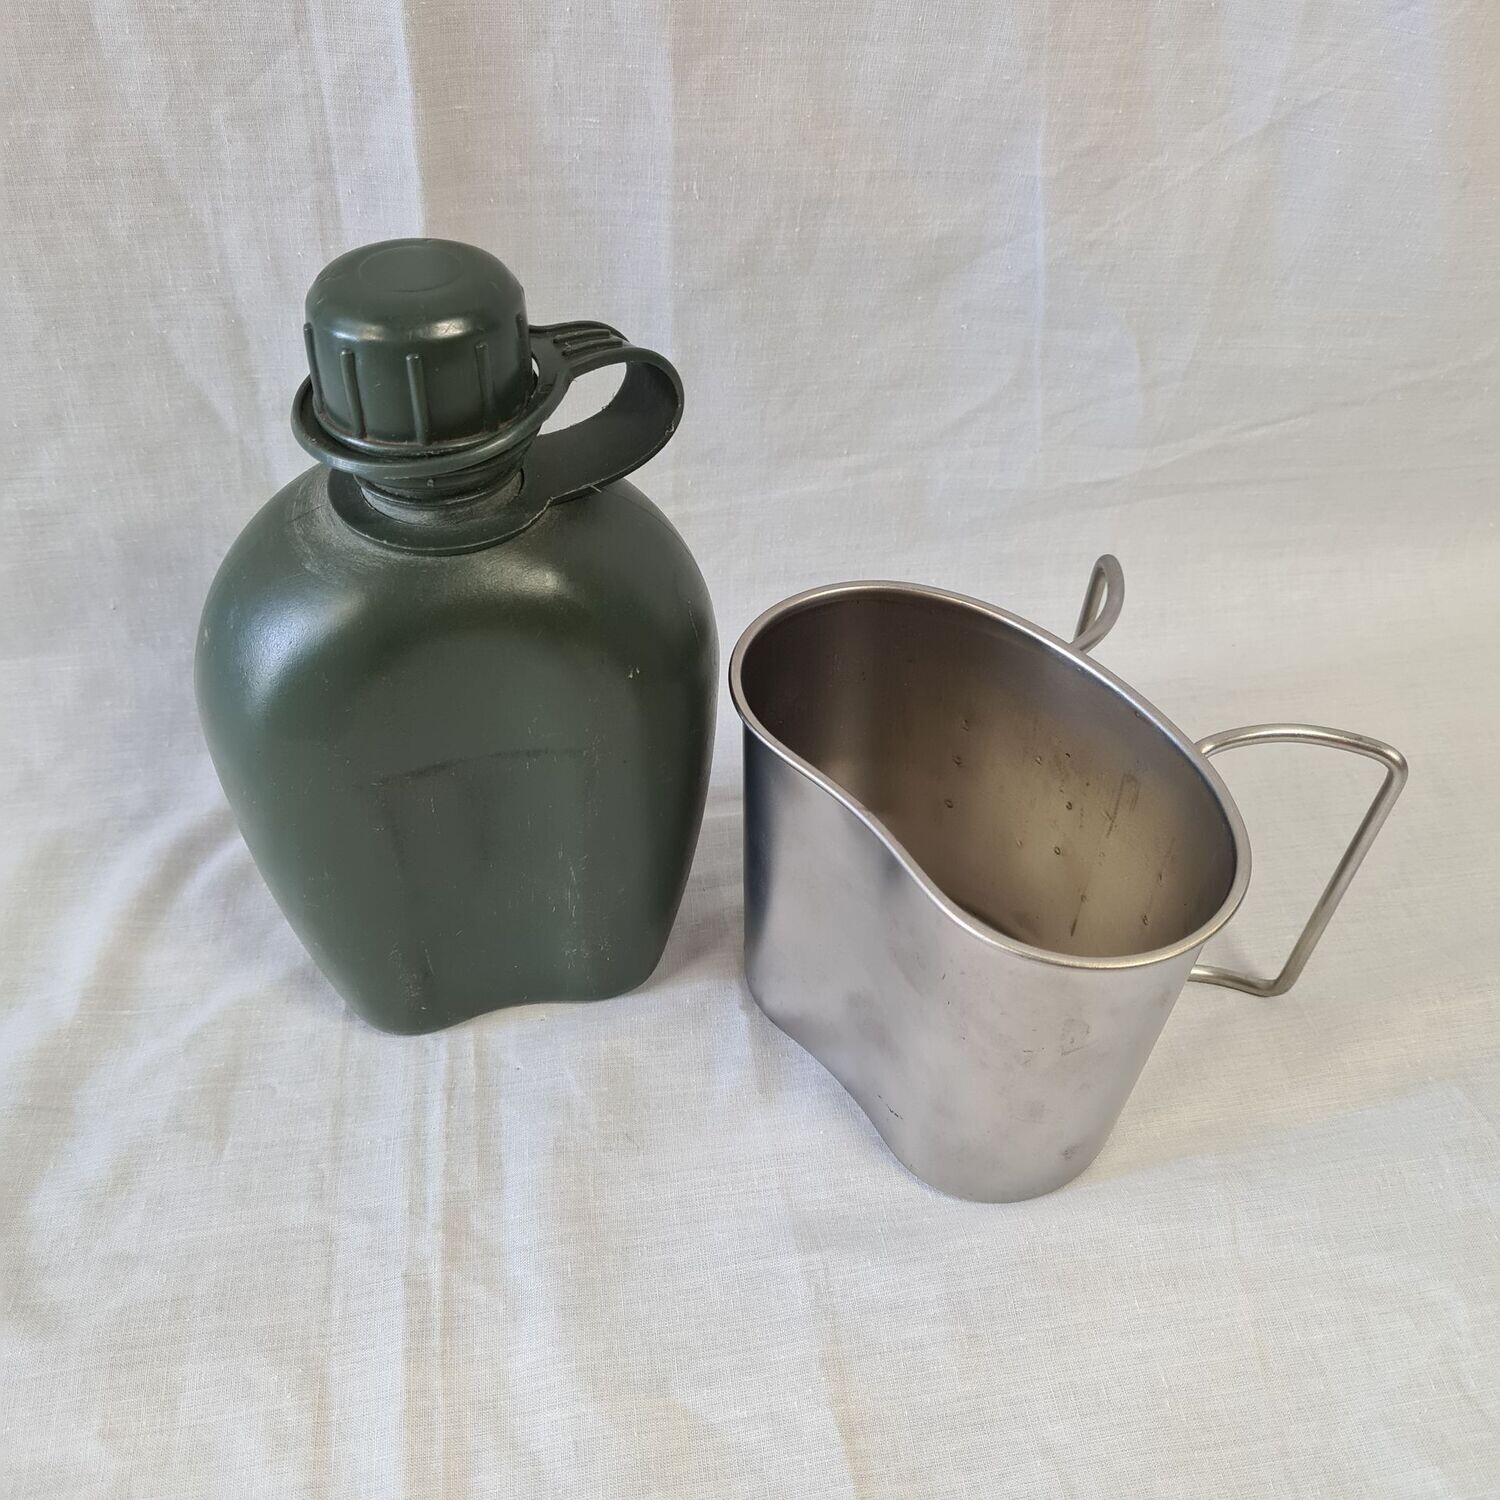 Dutch Army 1L Water Bottle/Canteen with Mug